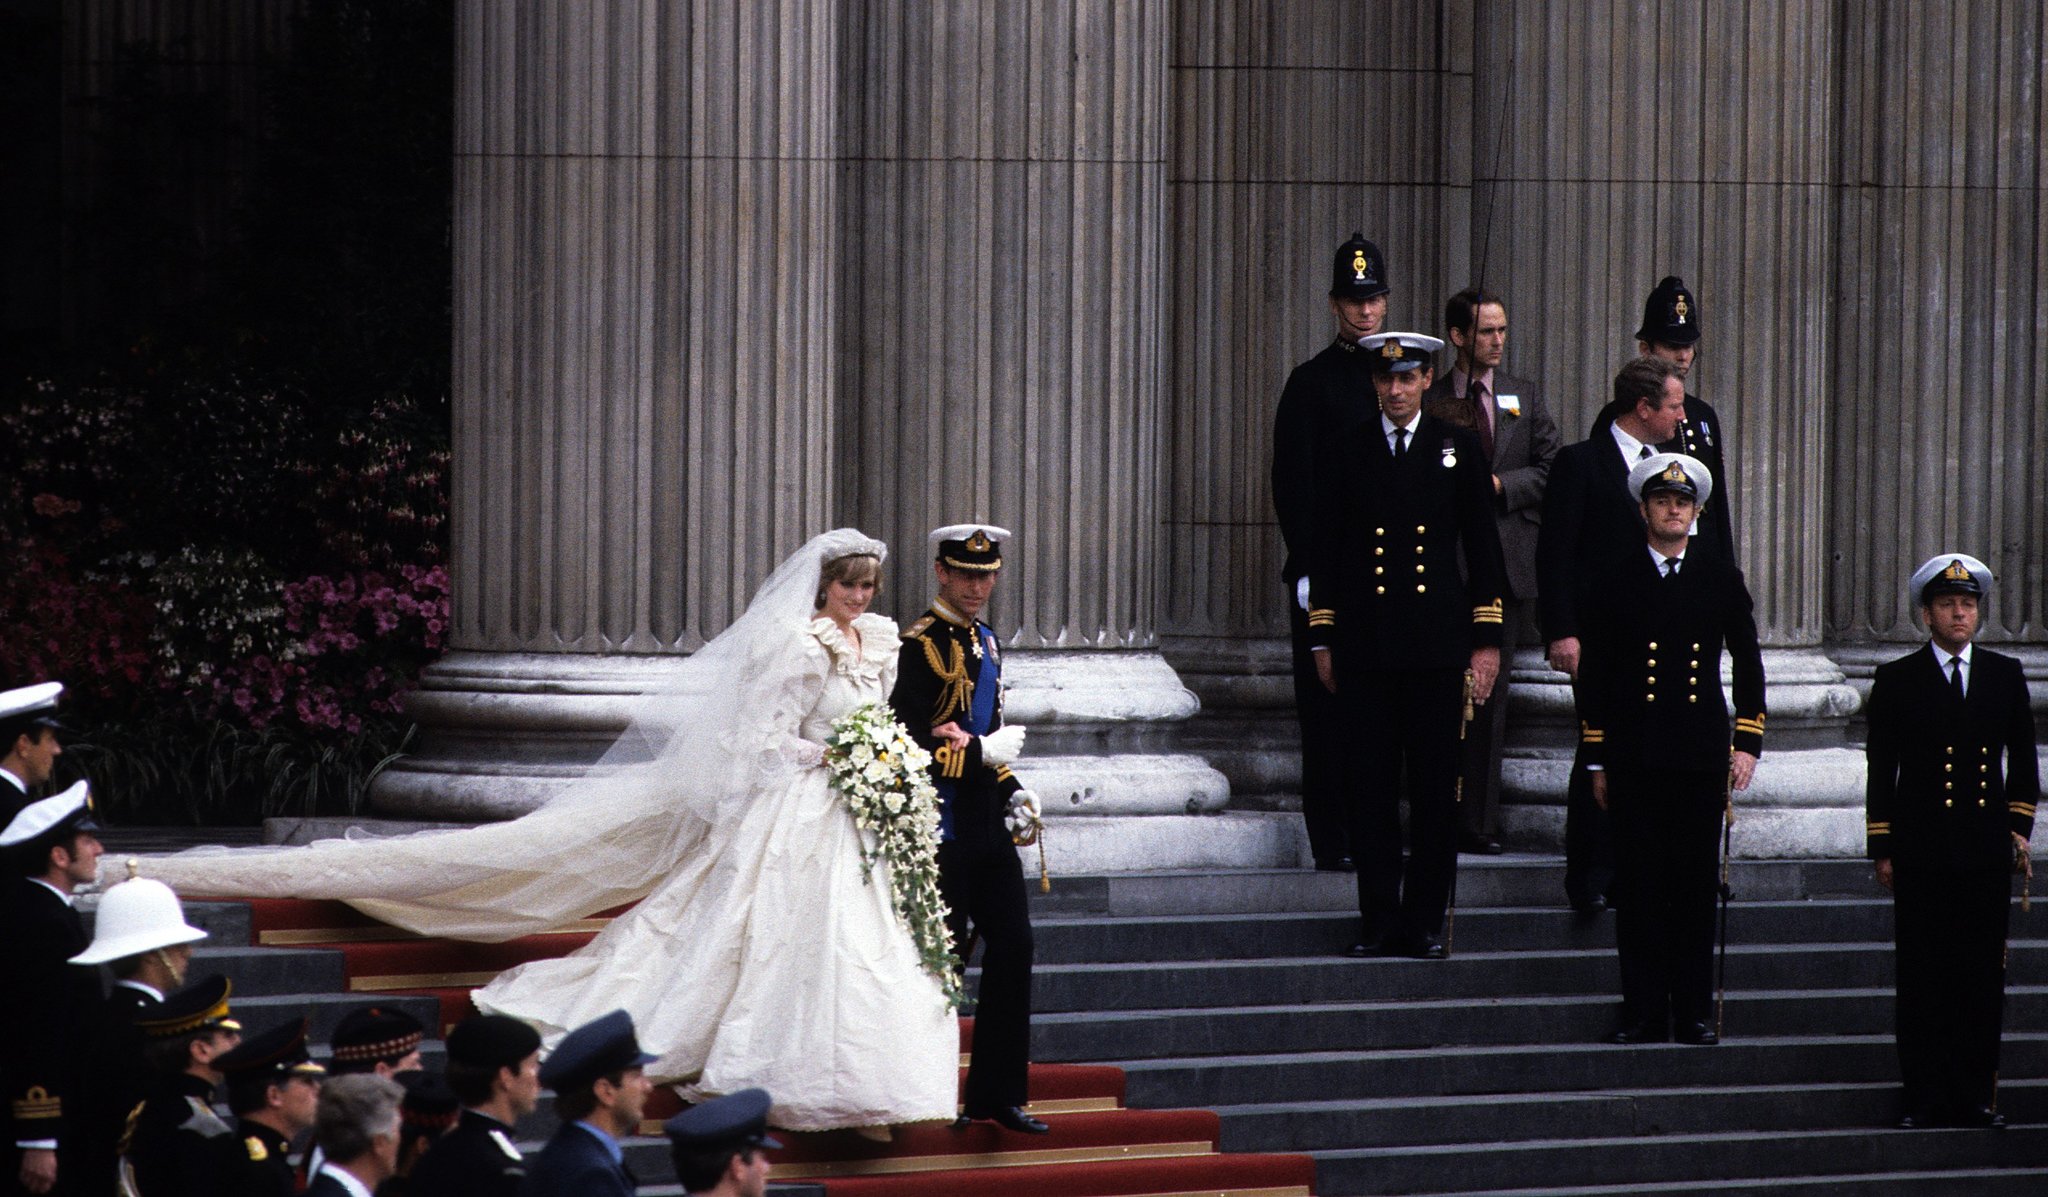 The Wedding of Prince Charles and Lady Diana Spencer